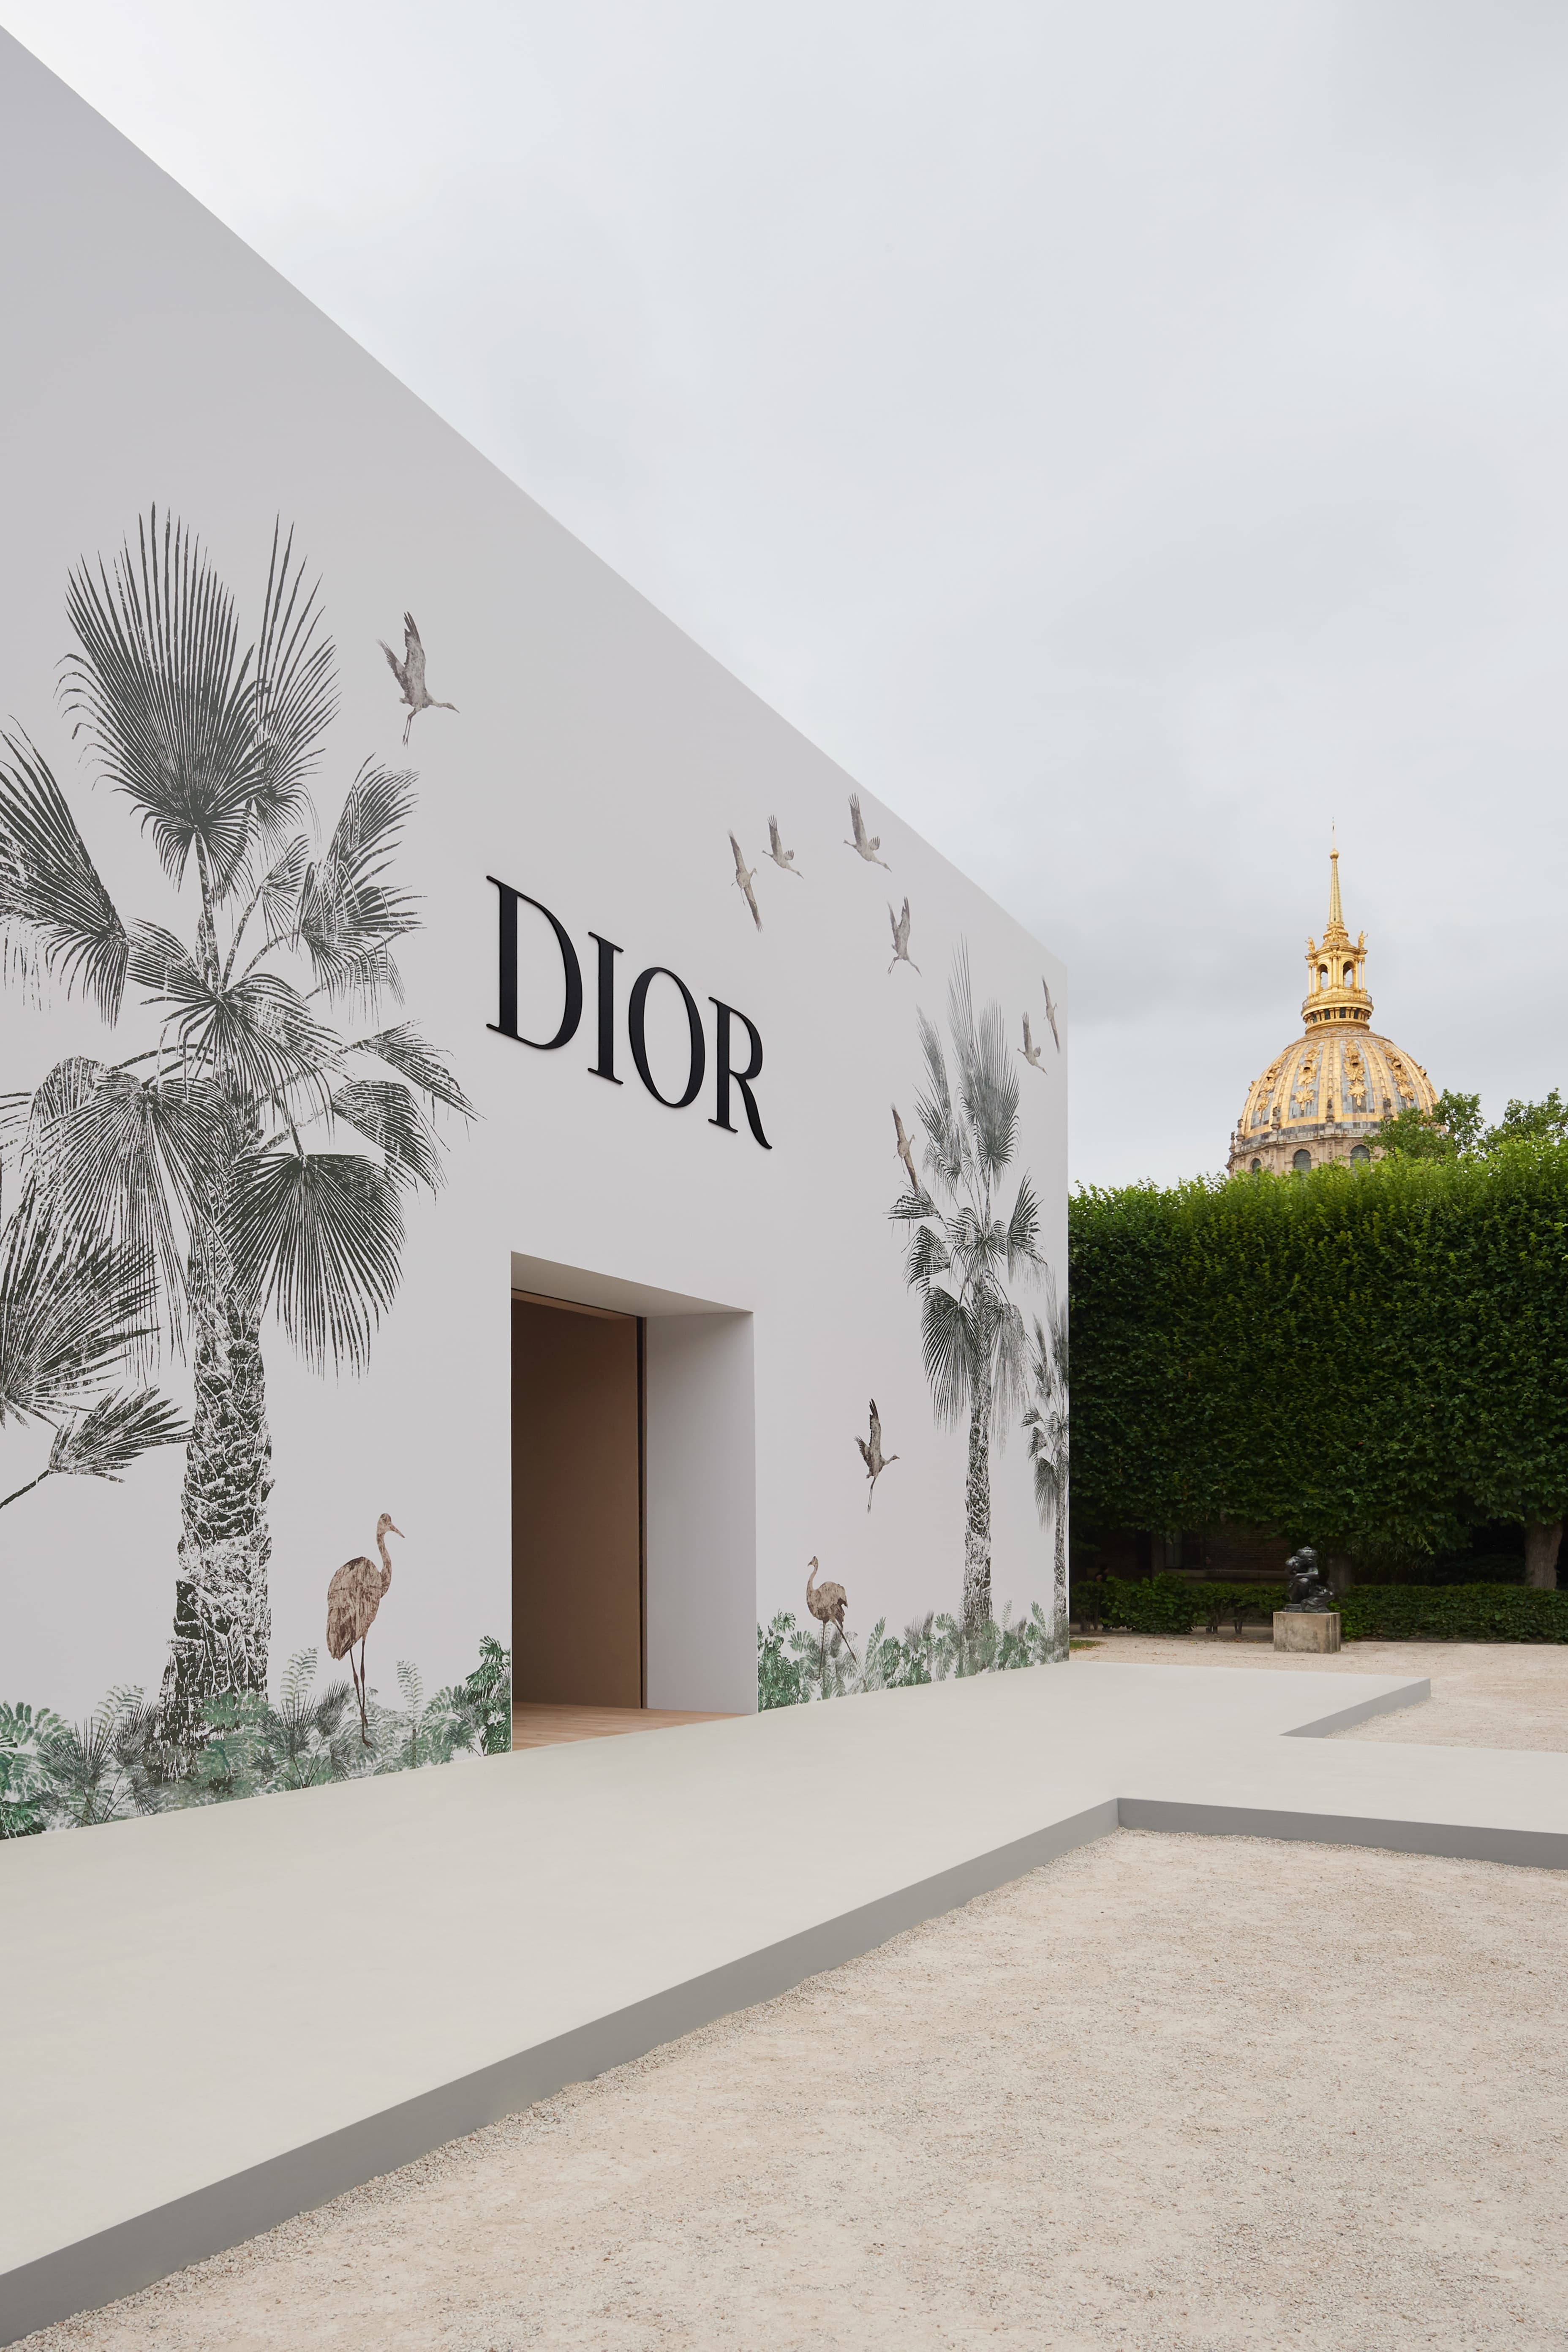 Dior logo on a wall editorial stock photo. Image of couture